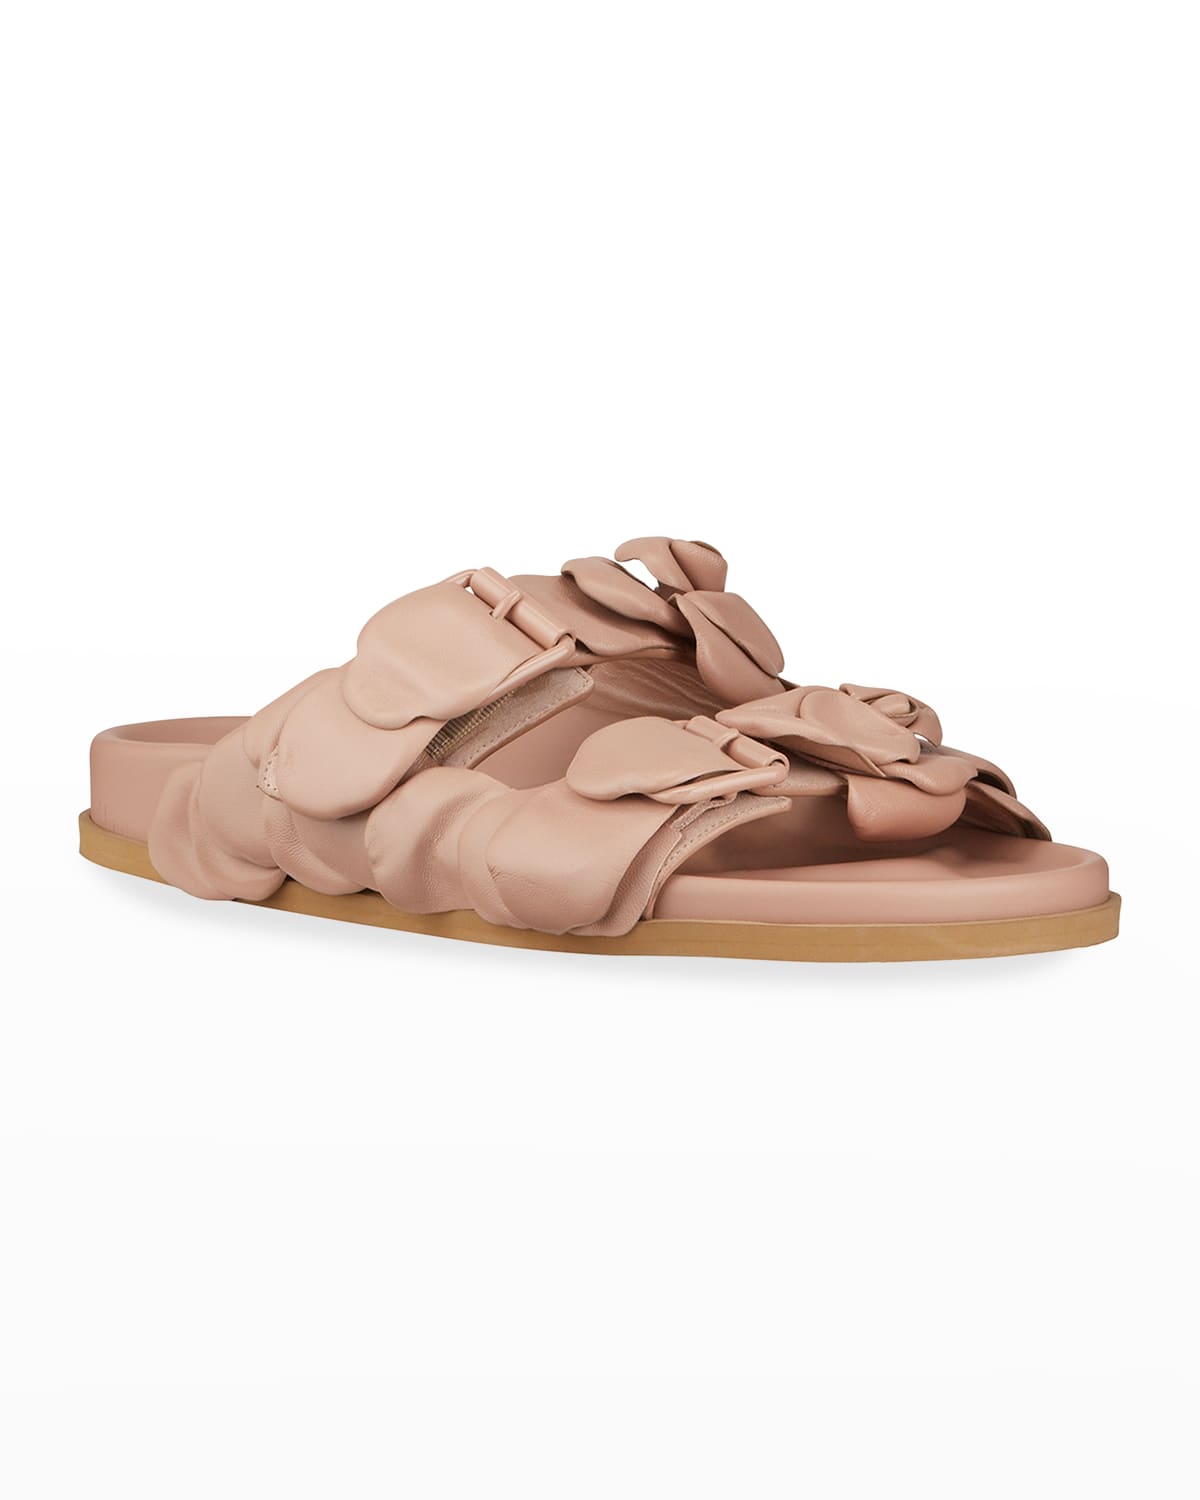 Valentino Pink Shoes | Neiman Marcus